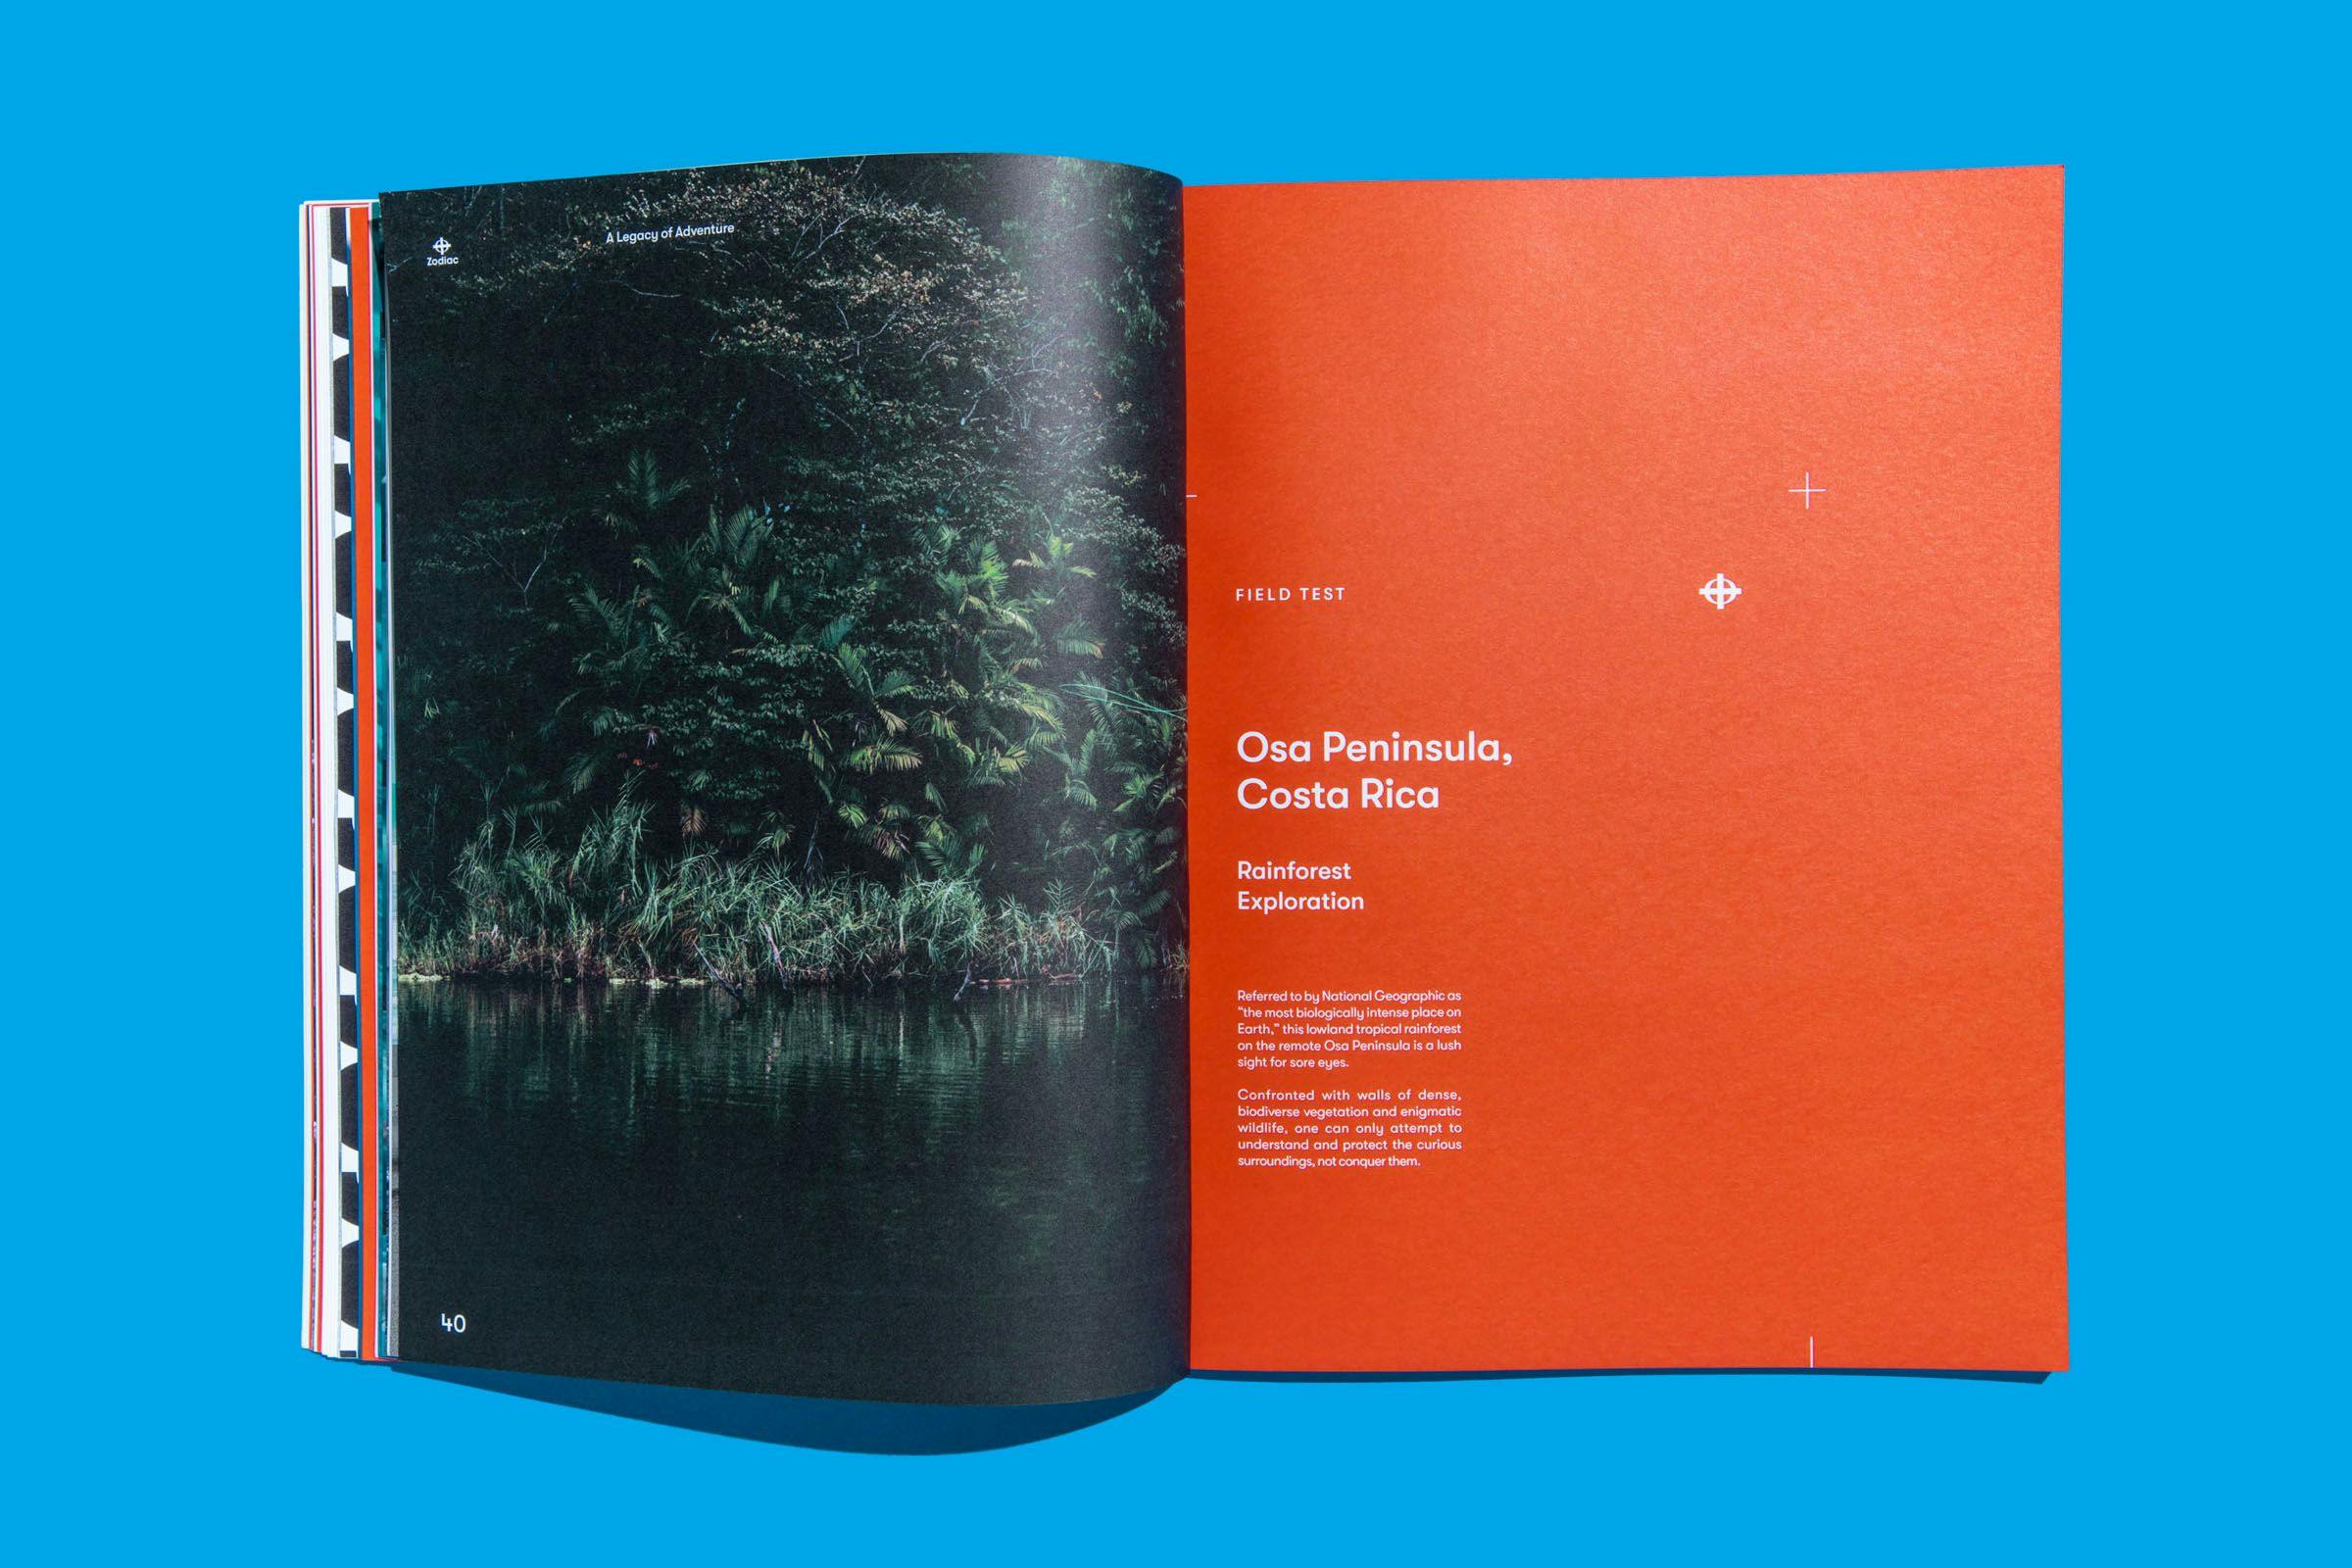 Vibrant pages from the Zodiac Watches: Brand Book showing nature near a body of water